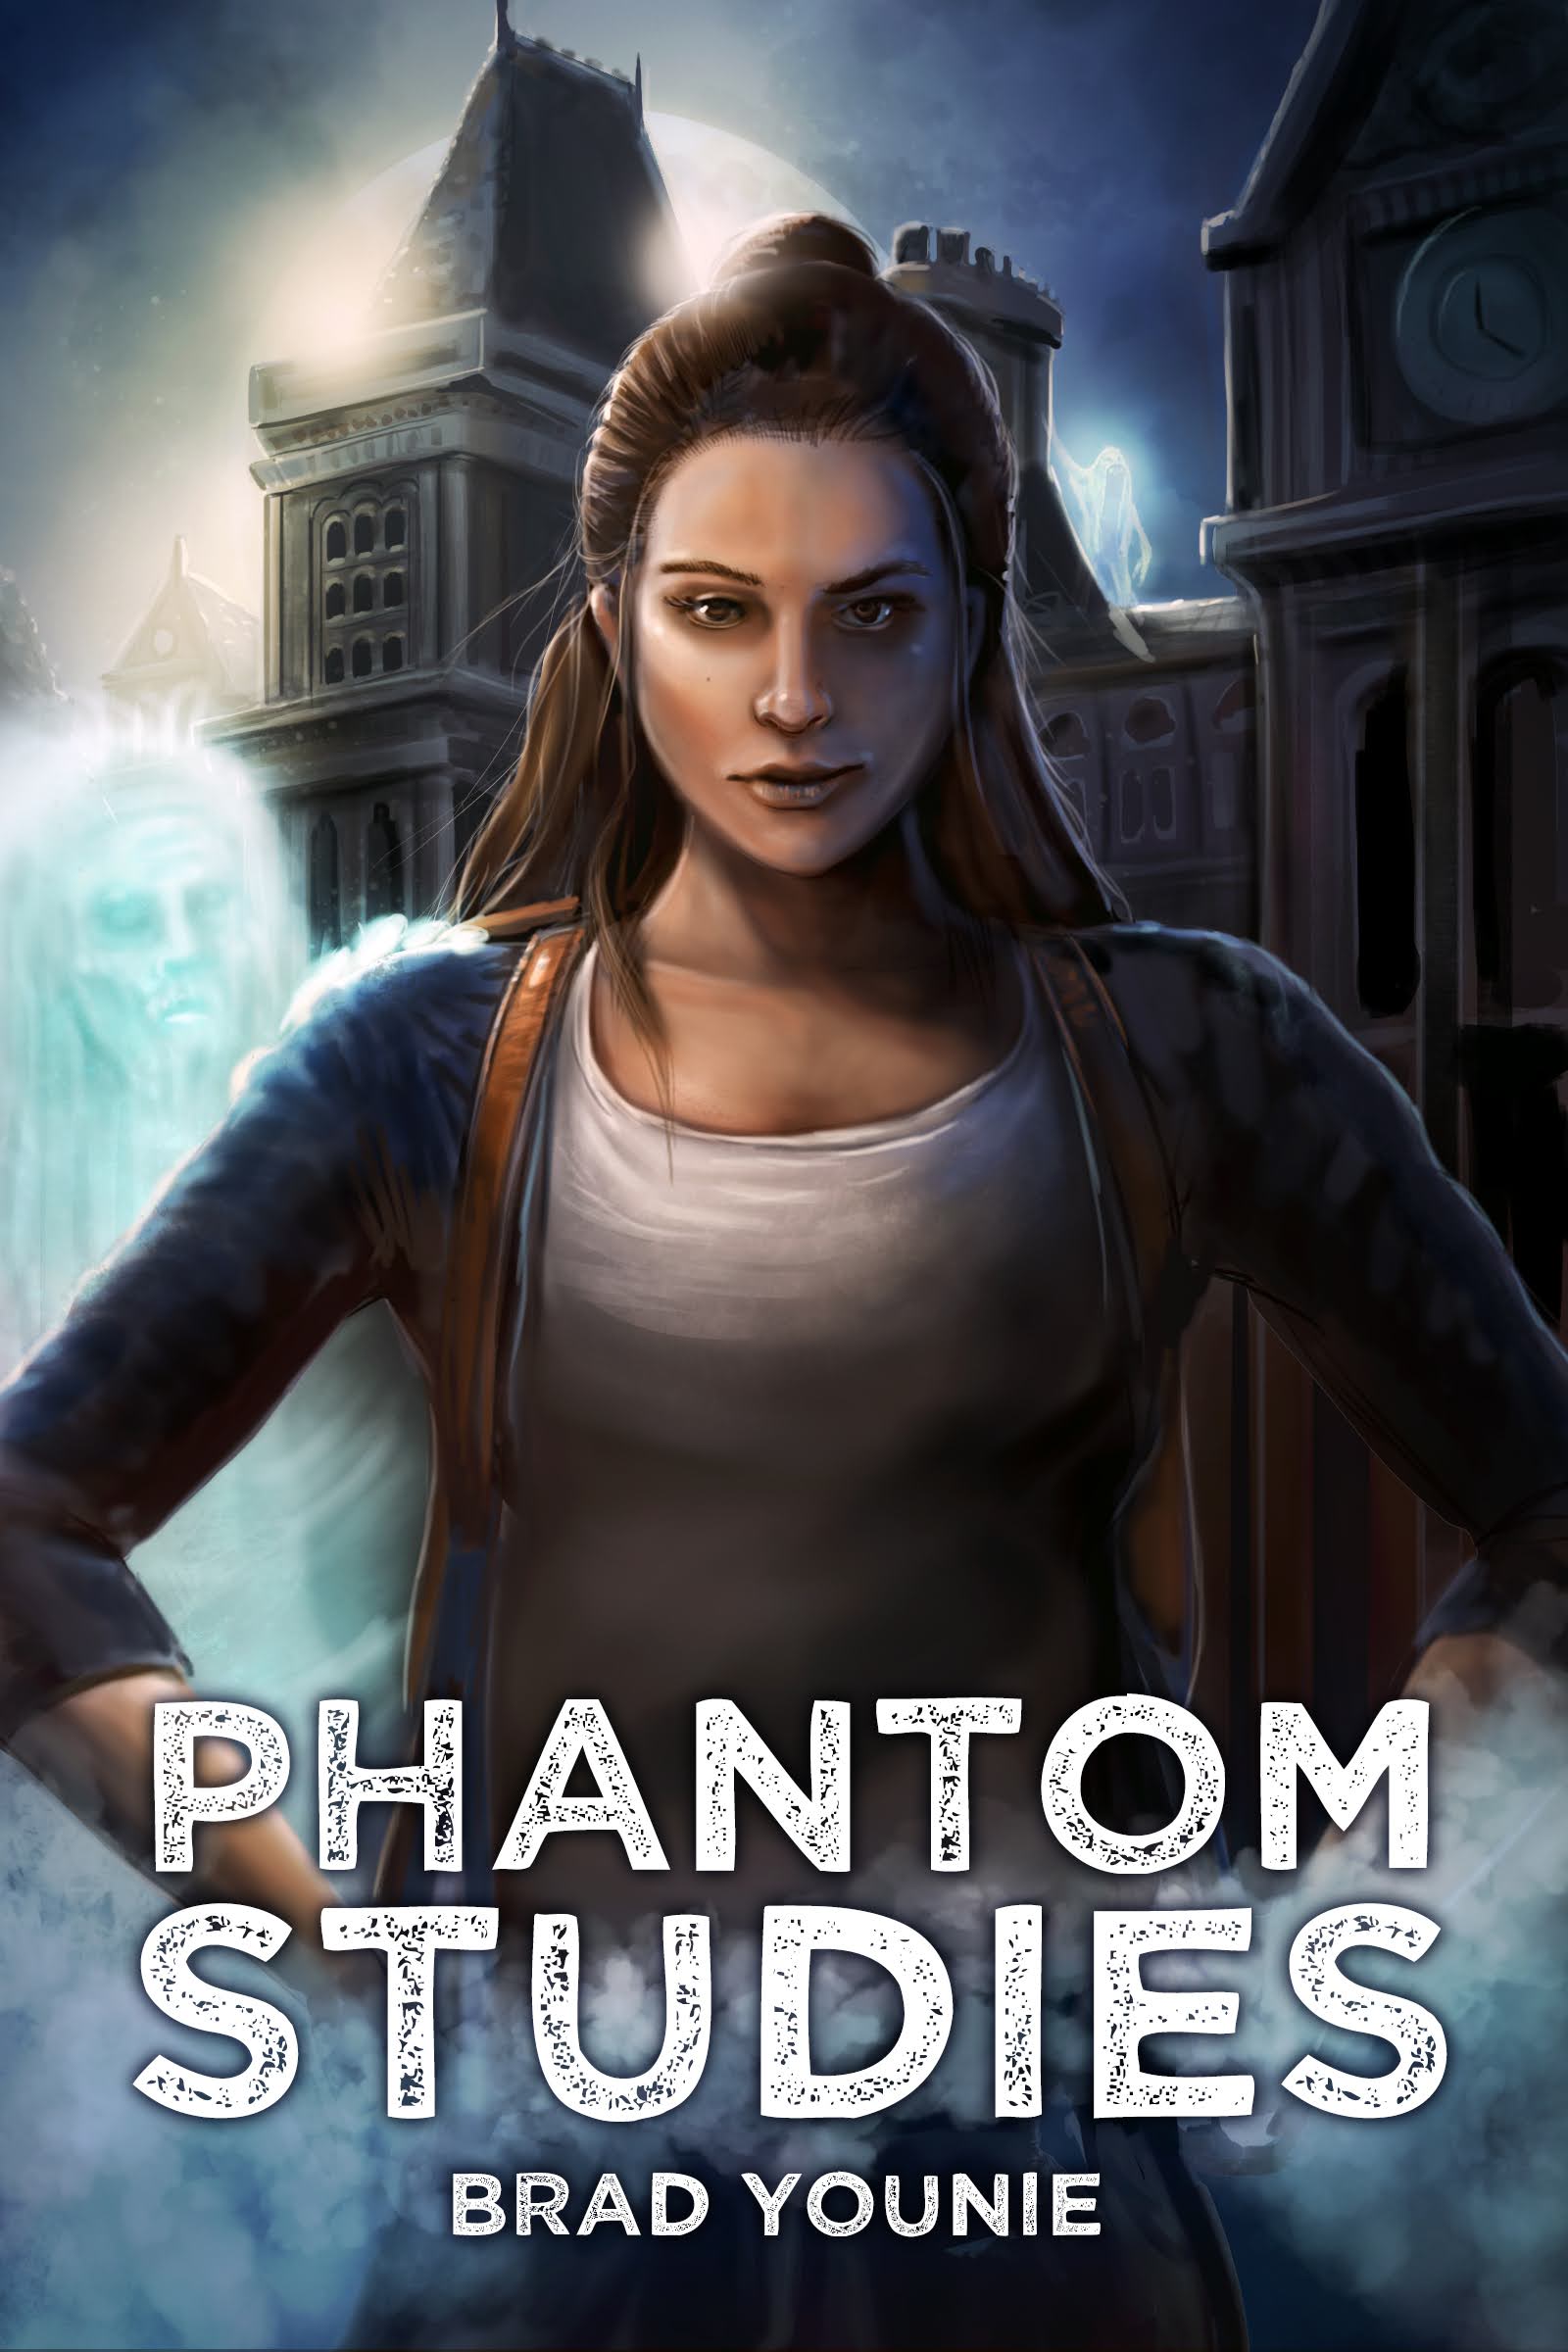 An Urban fantasy book cover designed by The Noble Artist. Girl with the ability to see ghosts and talk to them.